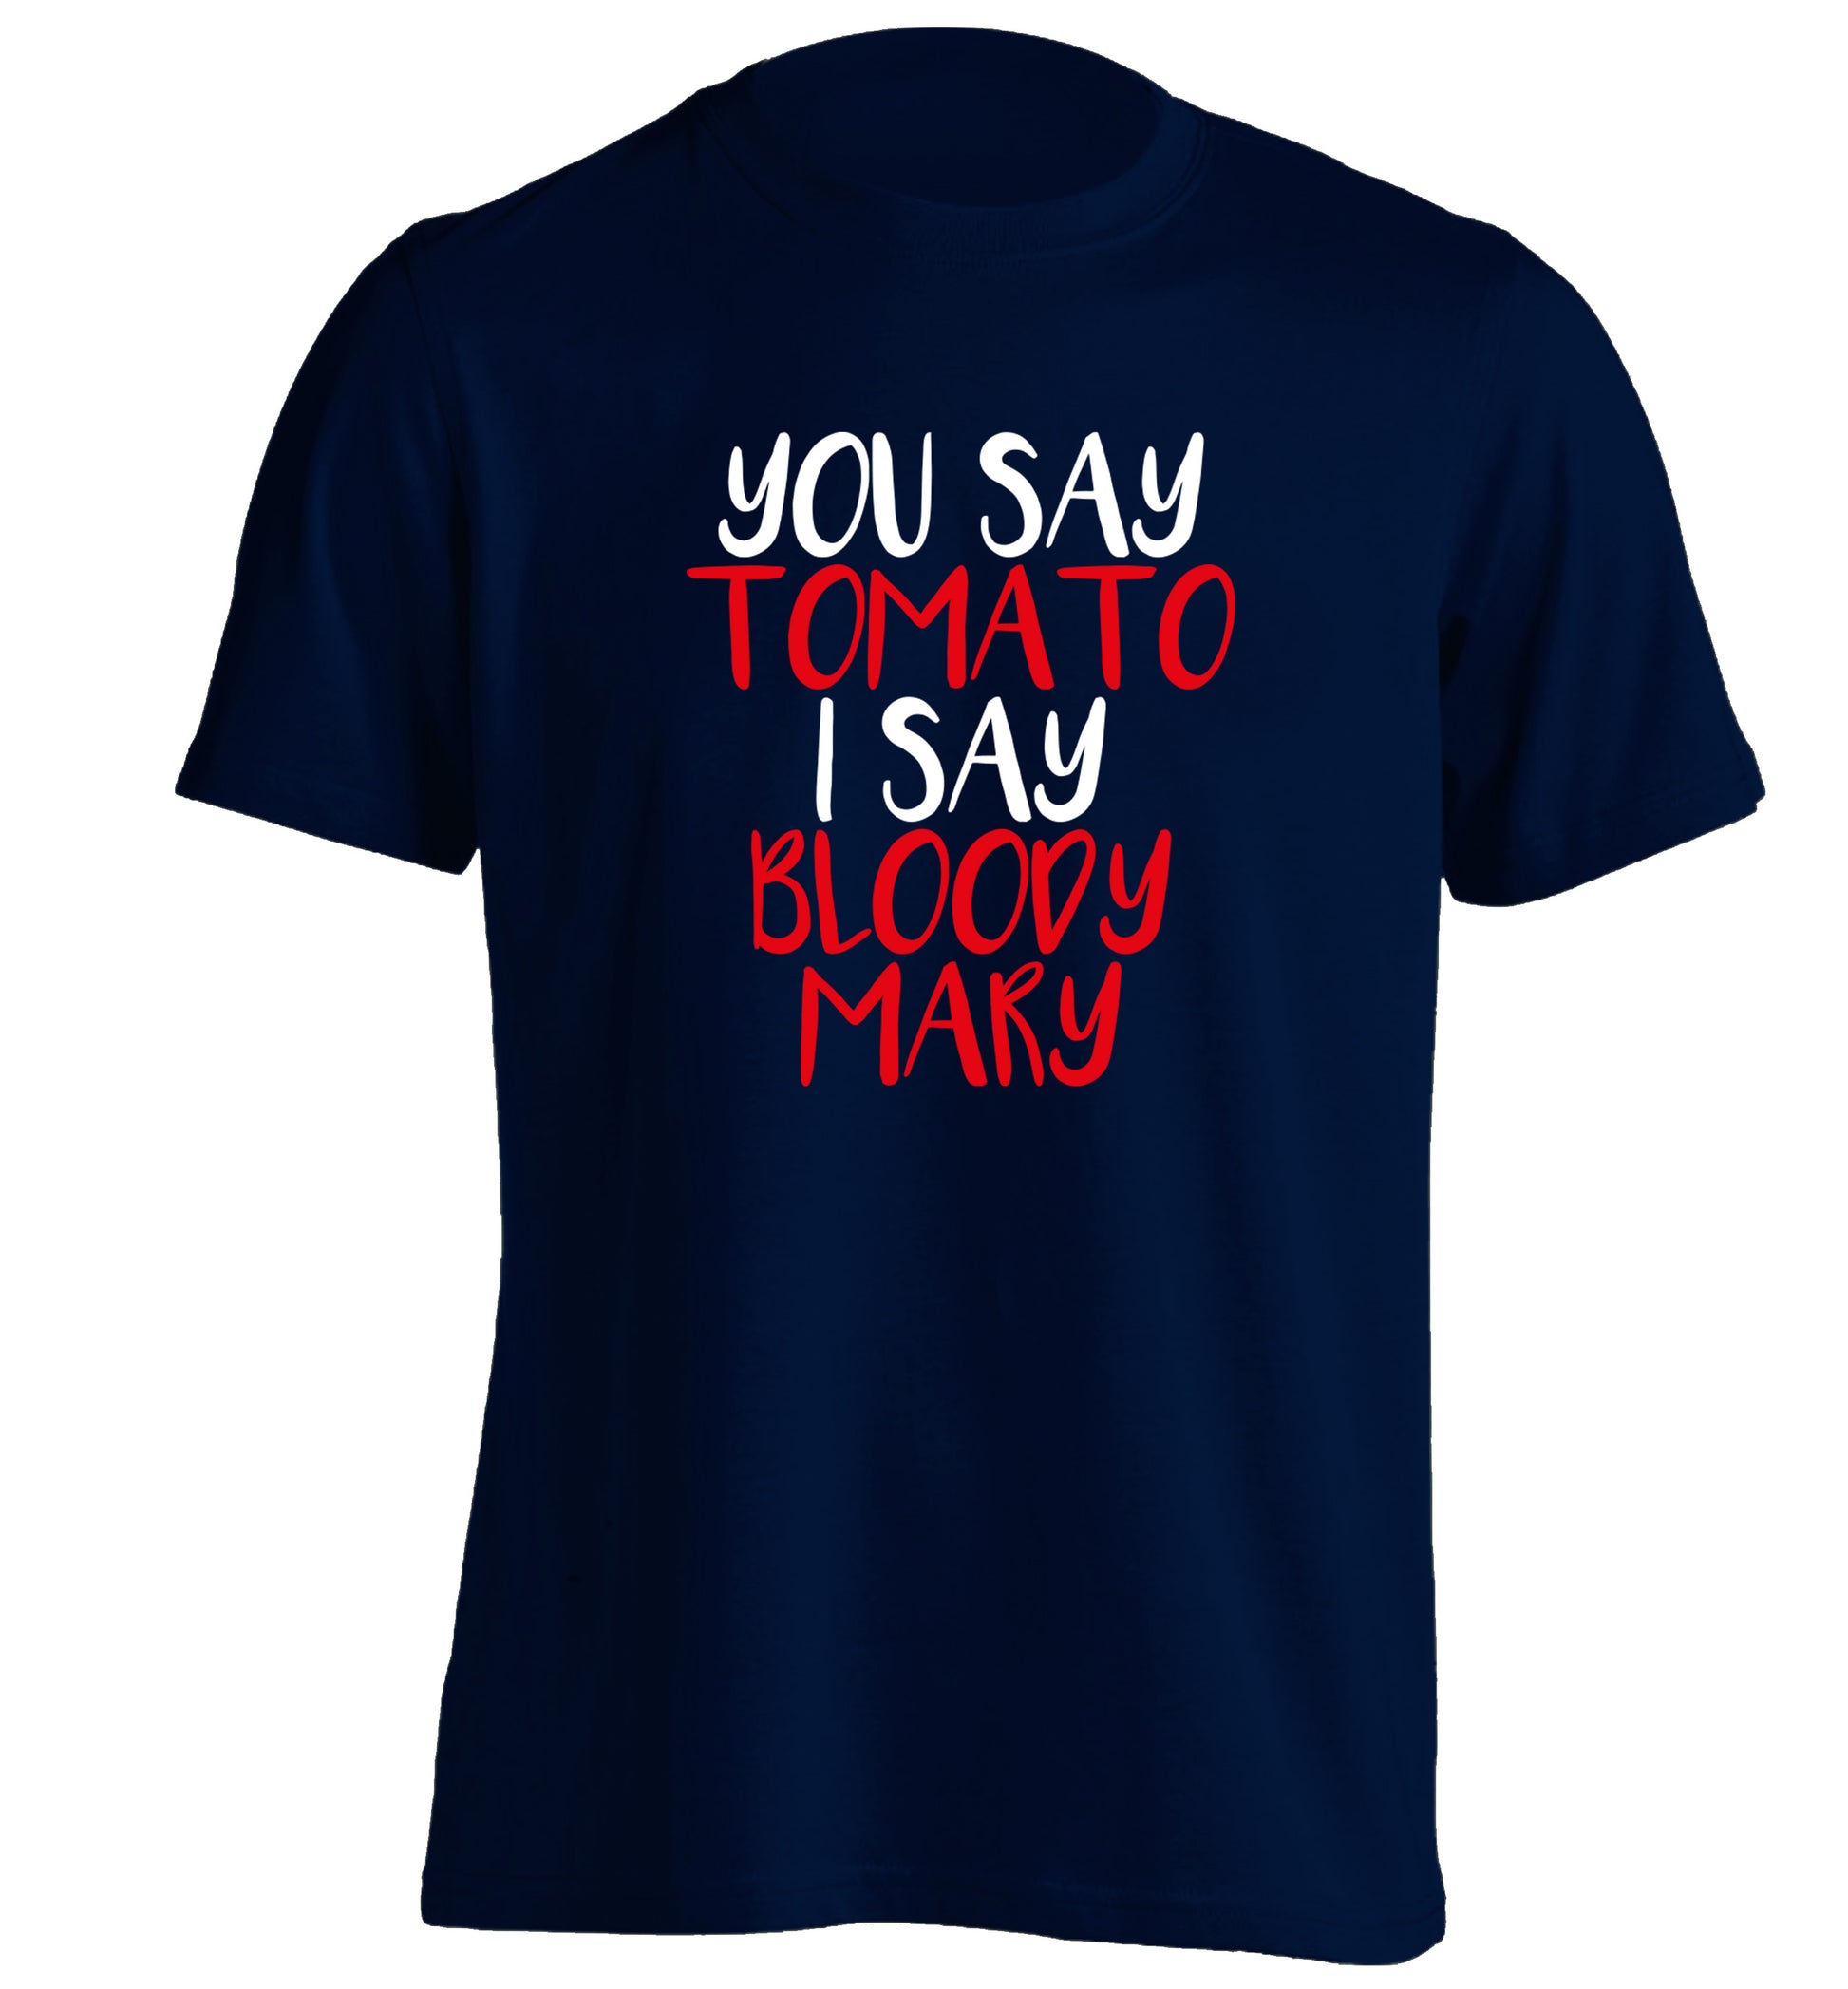 You say tomato I say bloody mary adults unisex navy Tshirt 2XL